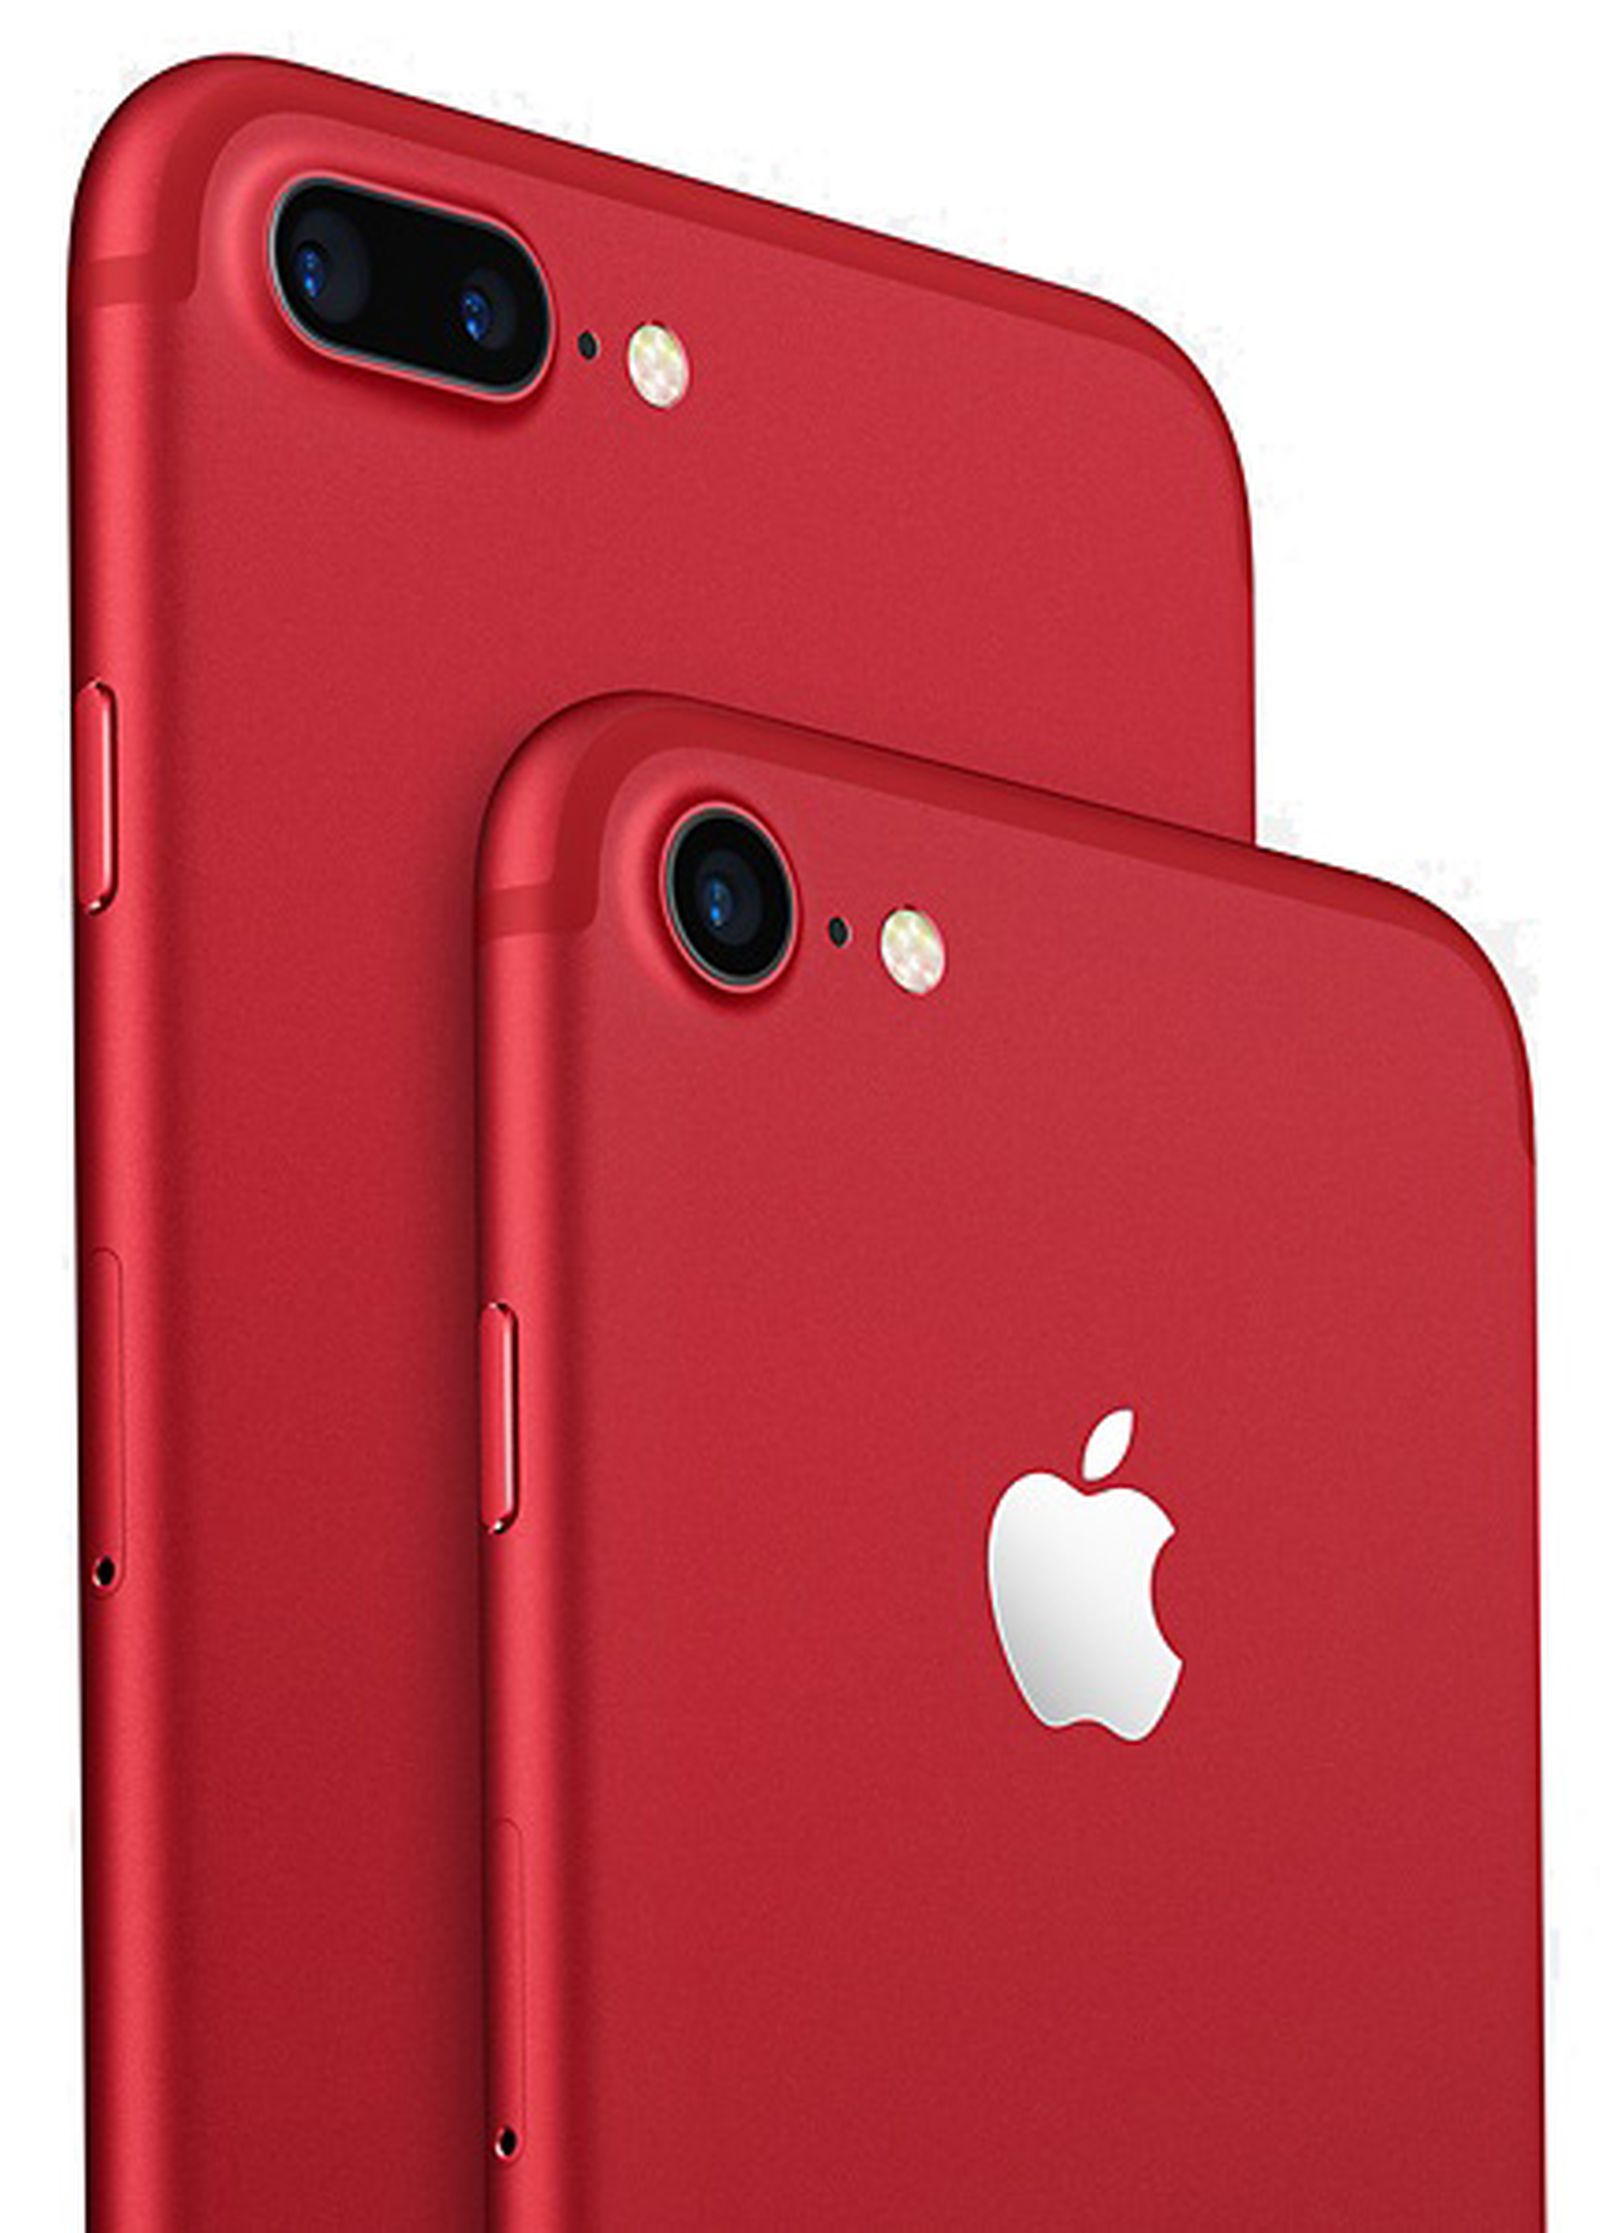 Virgin Mobile UK Says Apple Will Announce (PRODUCT)RED Edition 